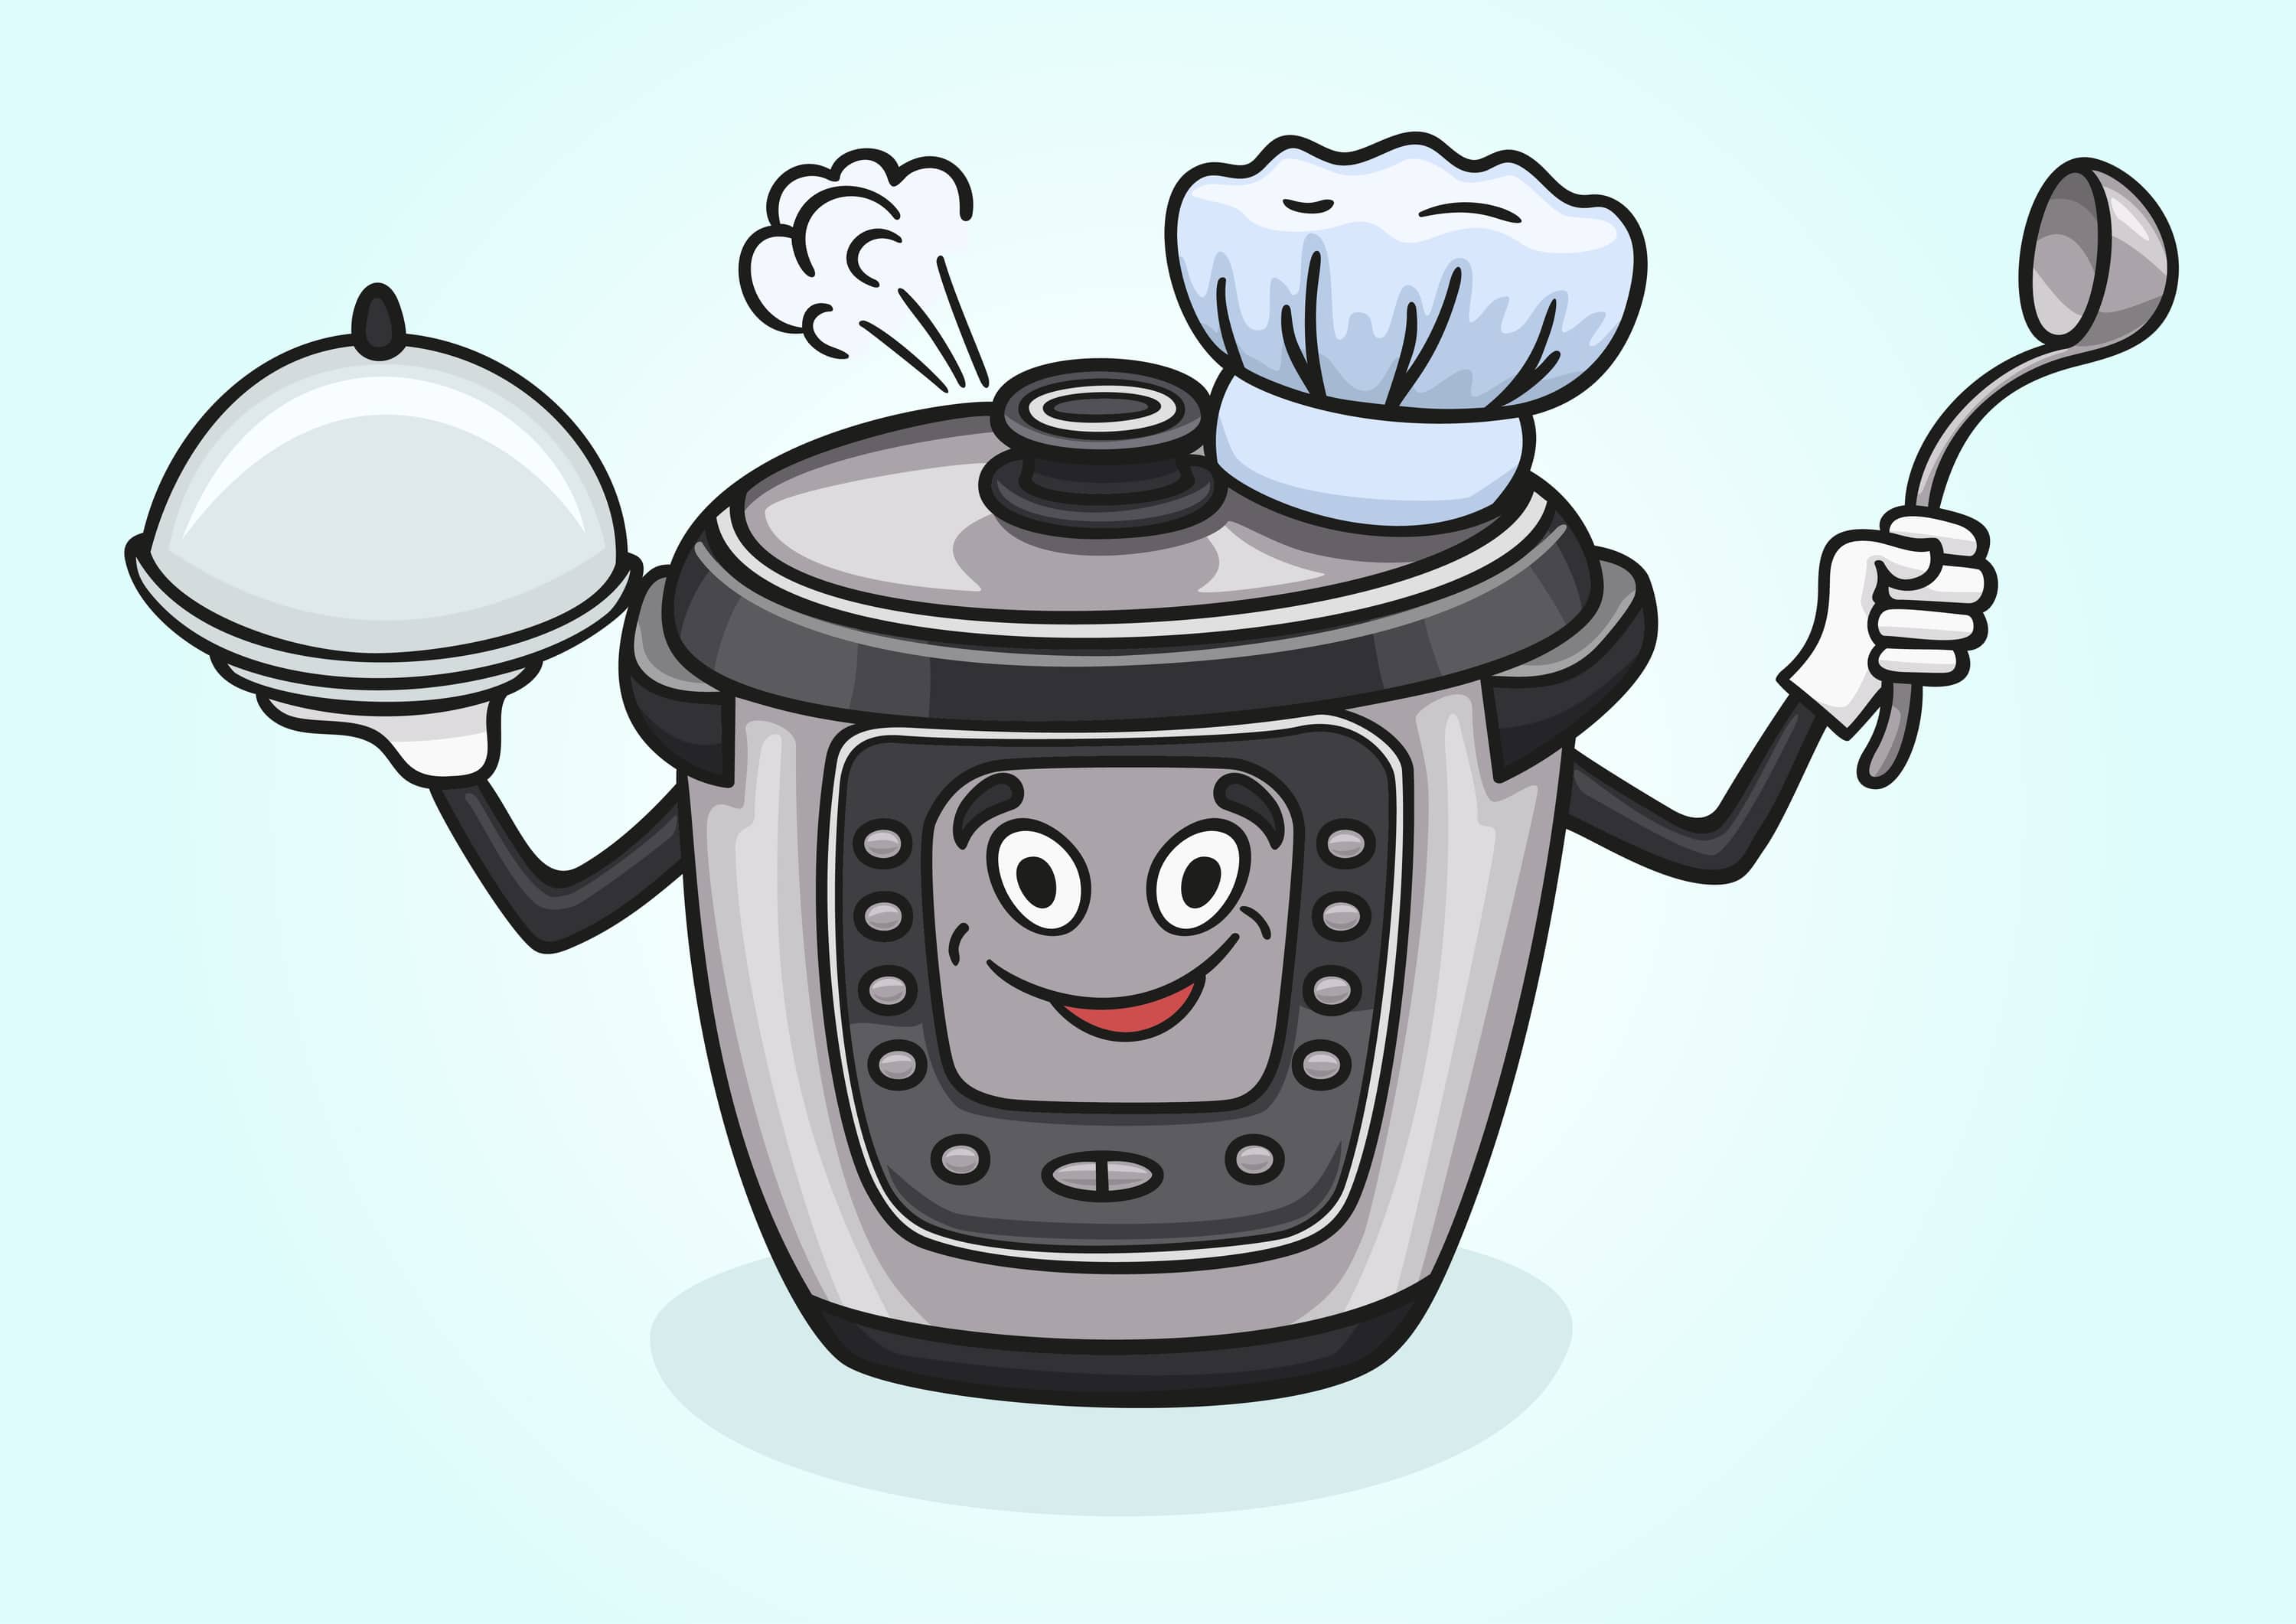 How To Choose A Multicooker For Beginners